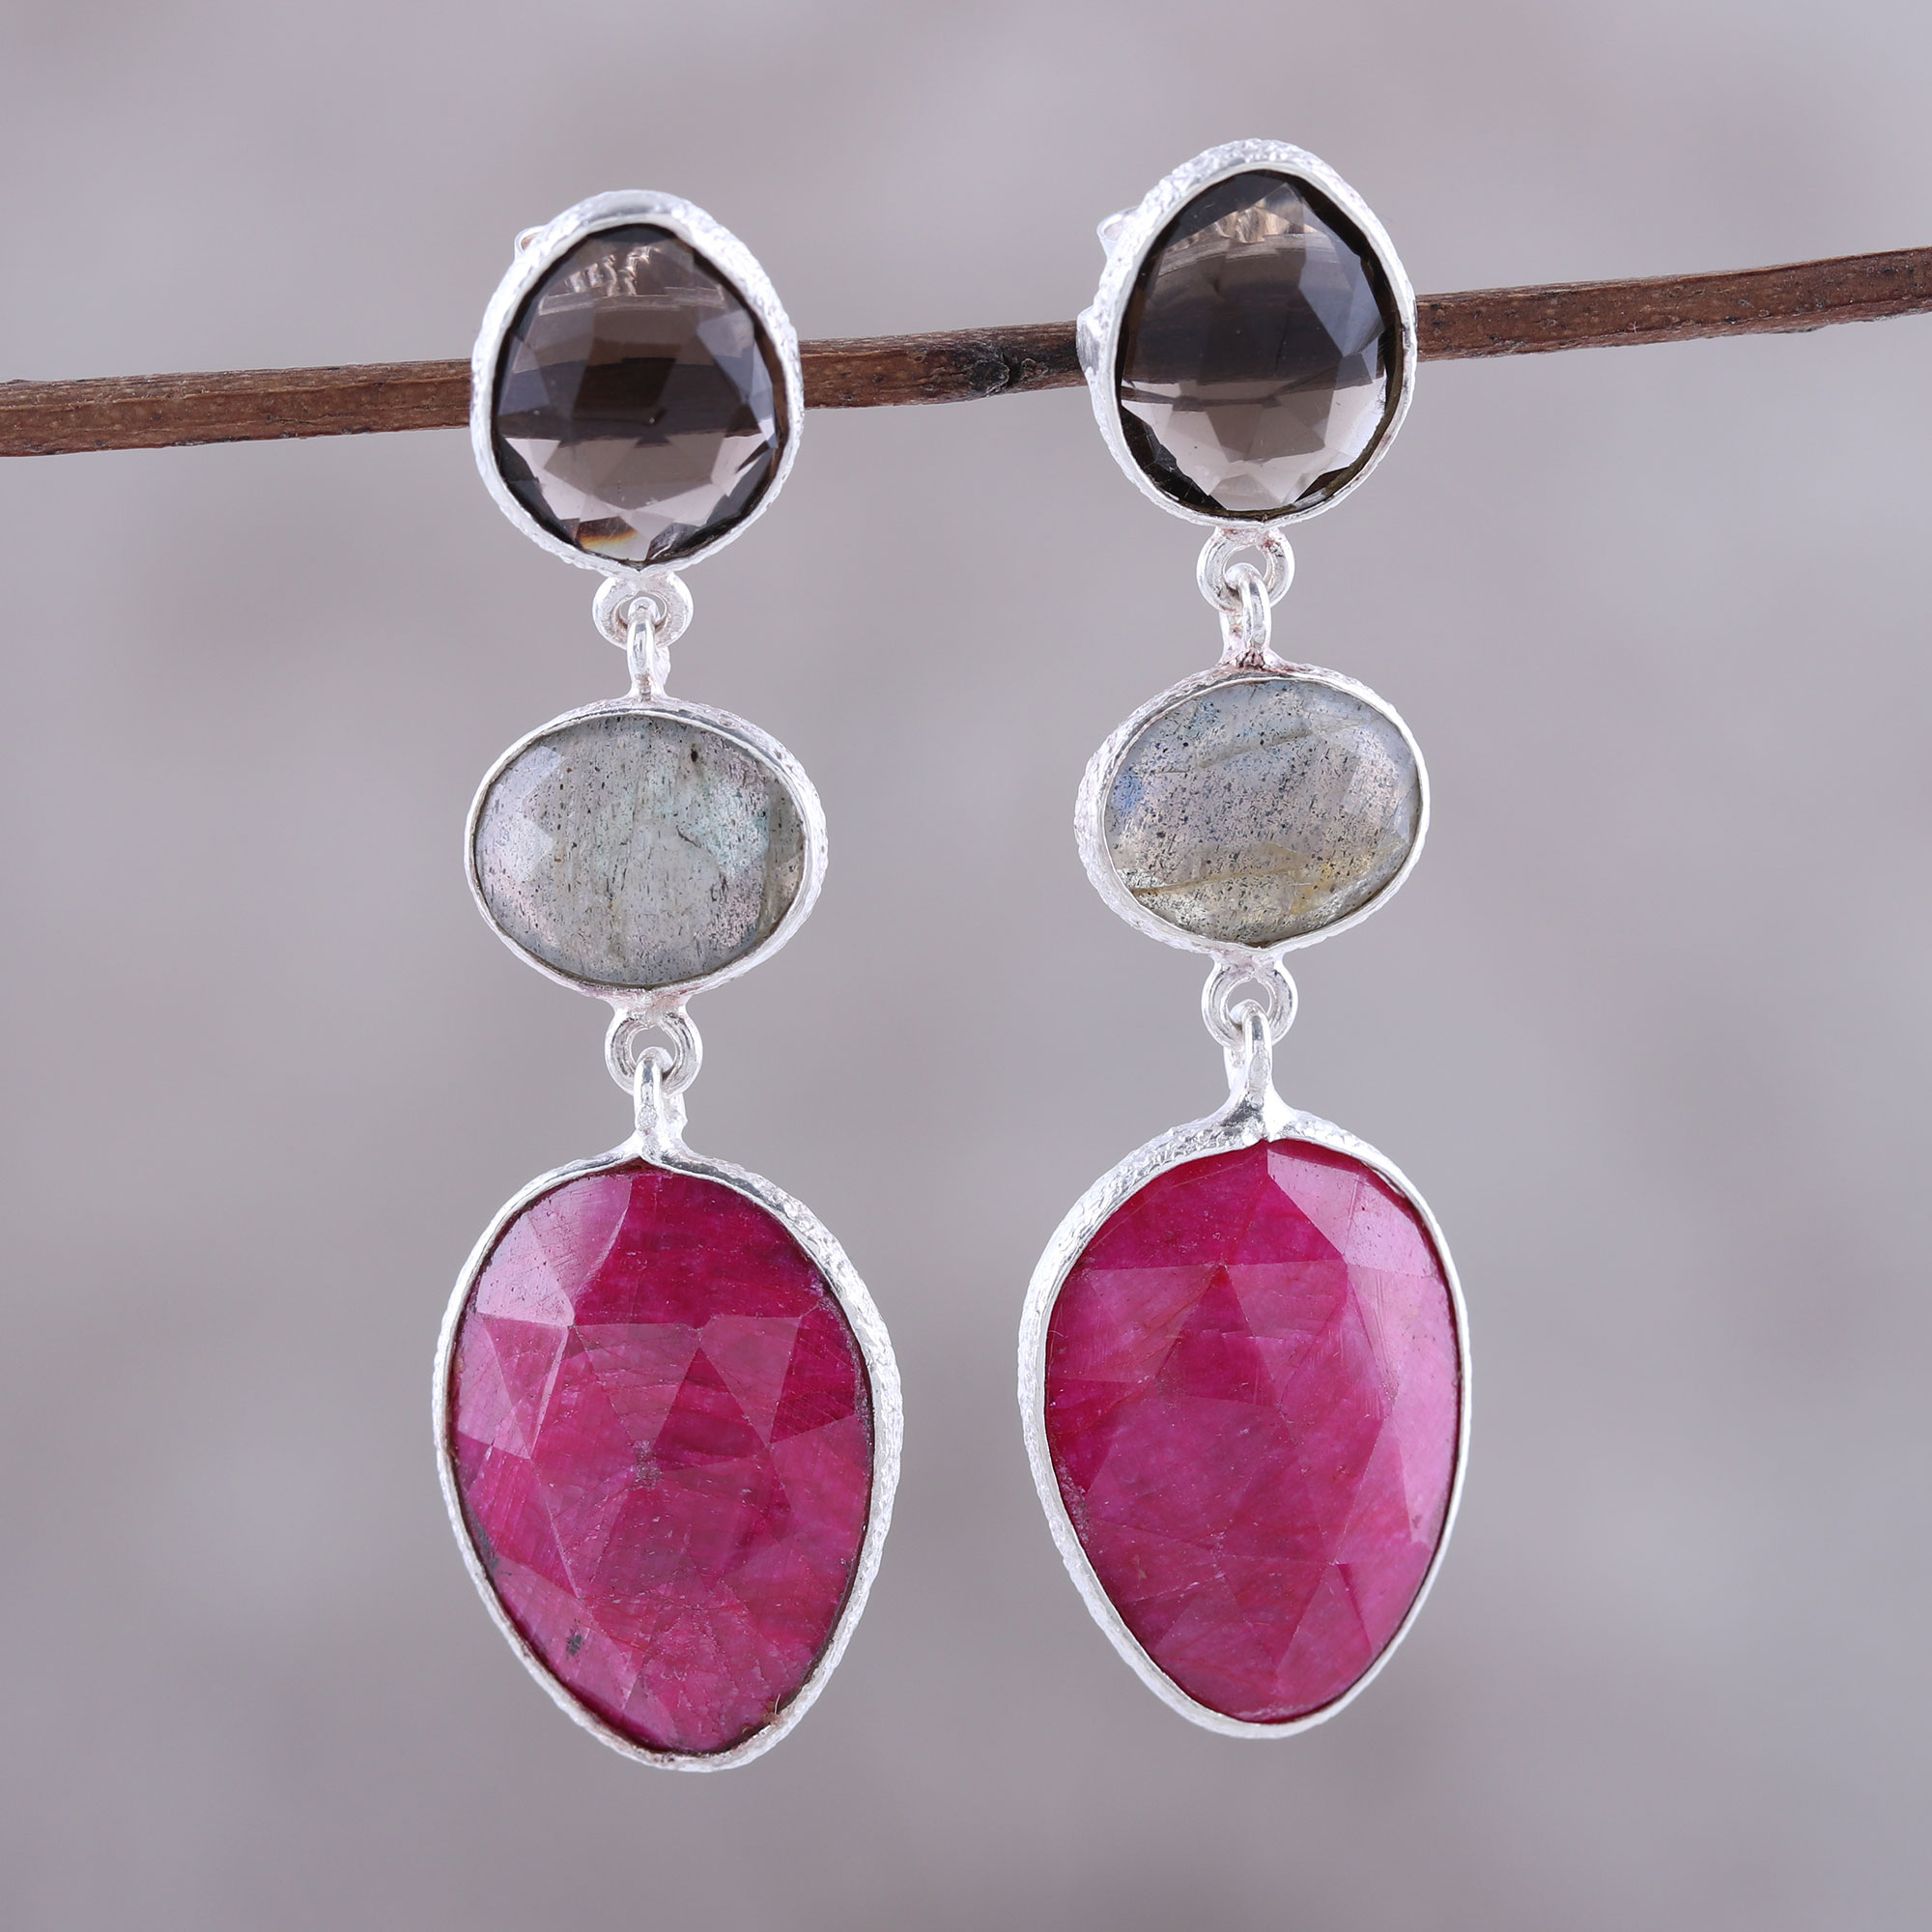 SPARKLER JEWELS Smoky Quartz,Round 925 Sterling Silver Dangle Earrings,Fashionable Gifts 